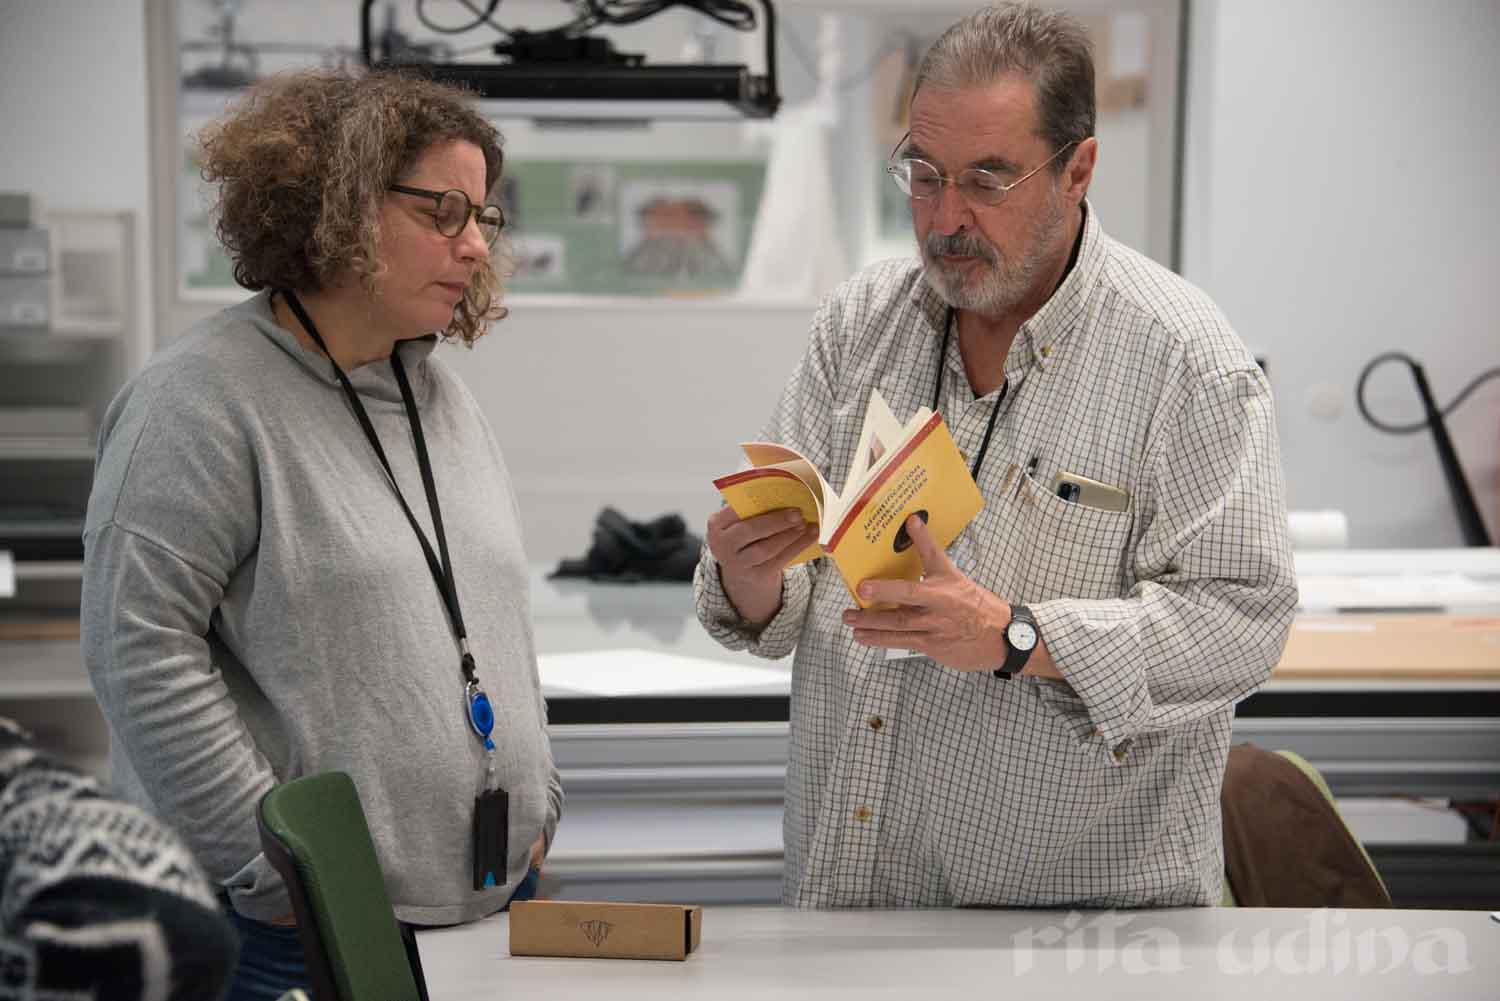 Kathrin Guthmann, paper conservator (National Museum, Oslo) and Jordi Mestre, photograph conservator (Girona, Spain) workshop photograph conservation.